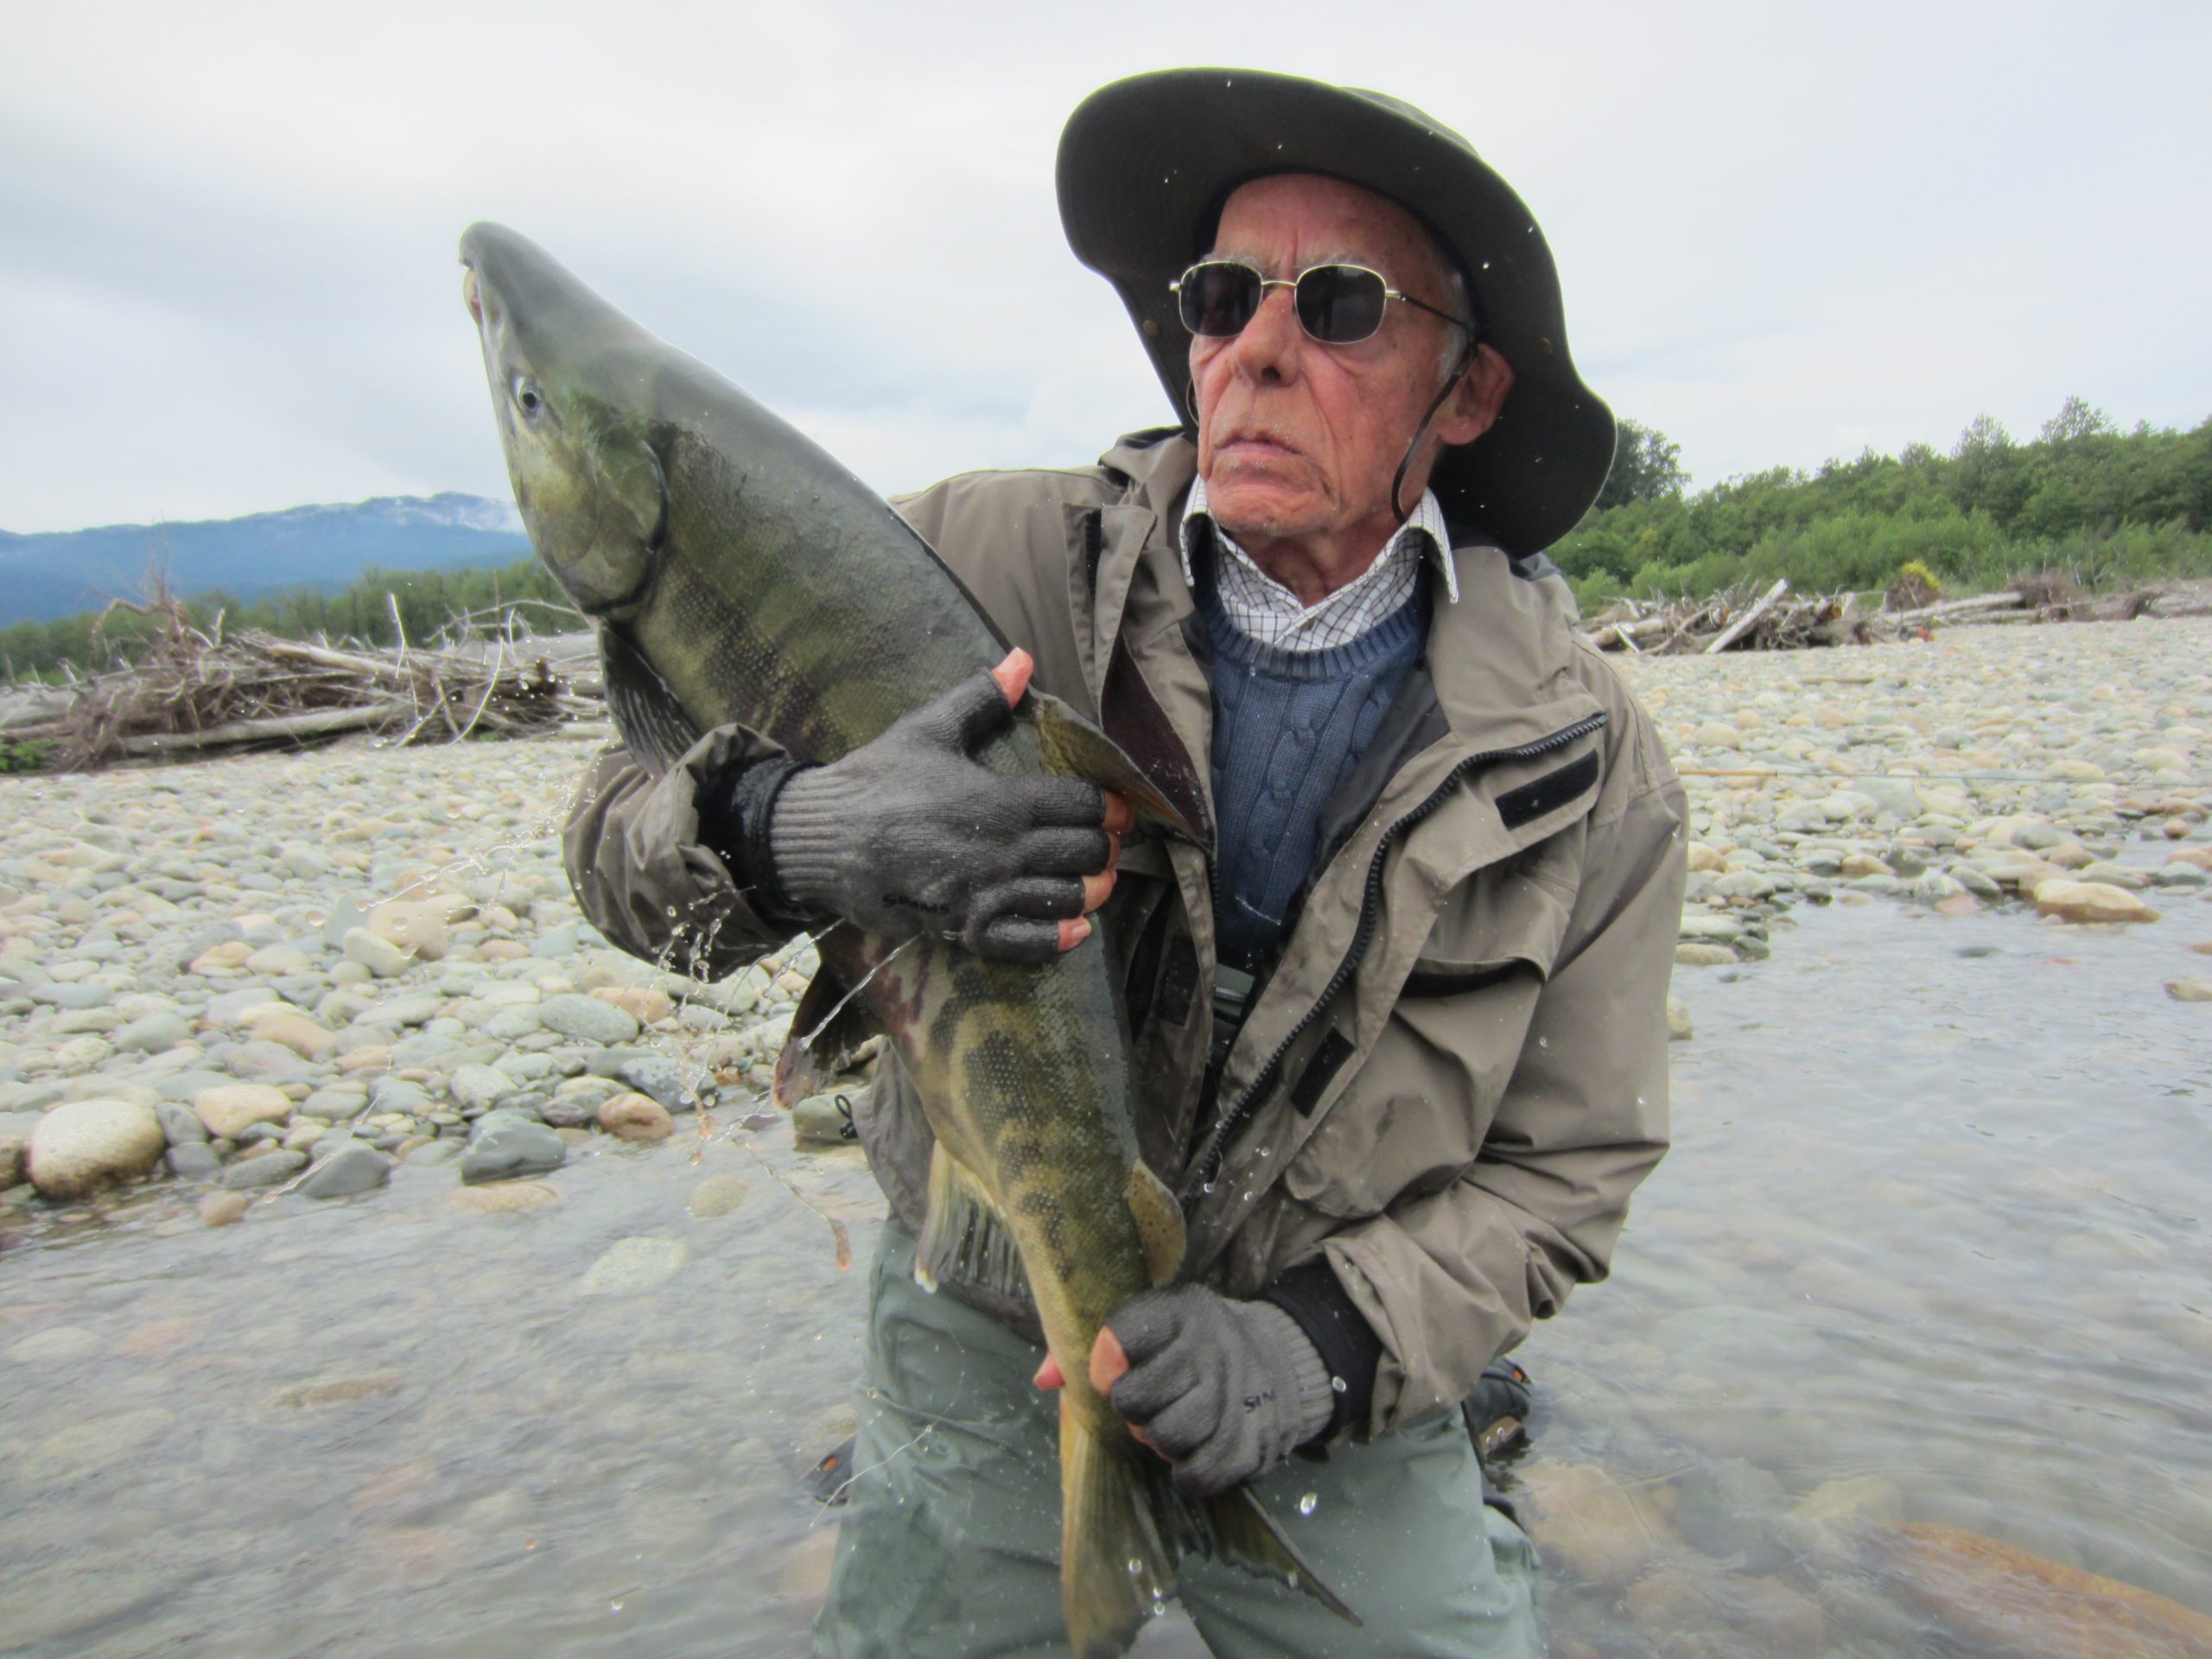 Tim struggles to keep hold of his prize - fly caught Chum Salmon from the Kitimat River Canada Hosted Kalum River Lodge Report